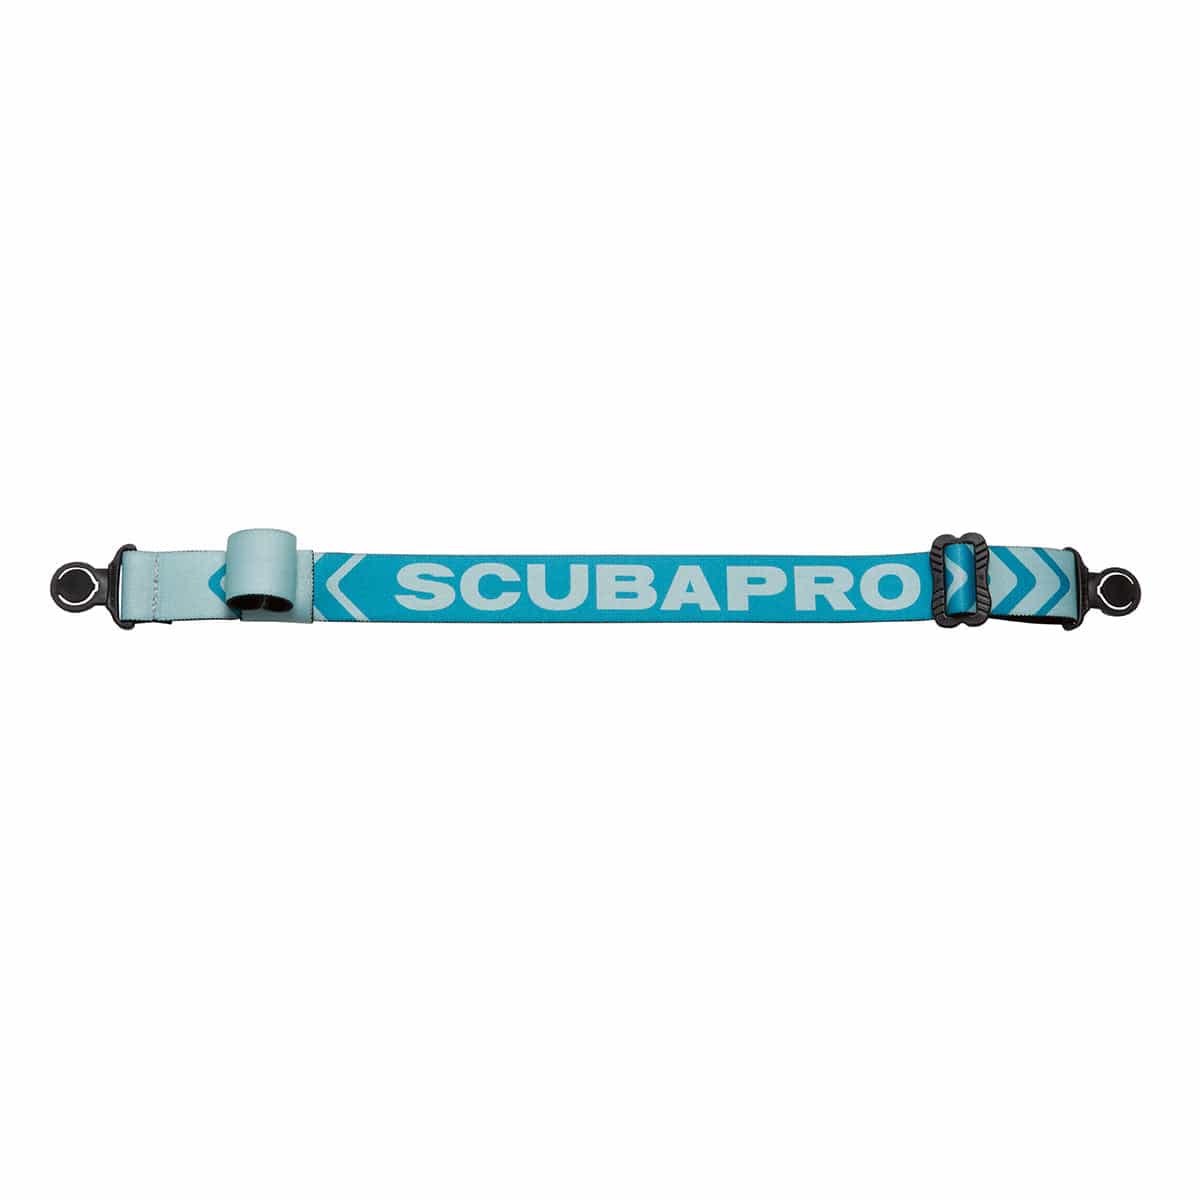 Scubapro Comfort Strap - Turquoise - 24.730.020-NED - 16